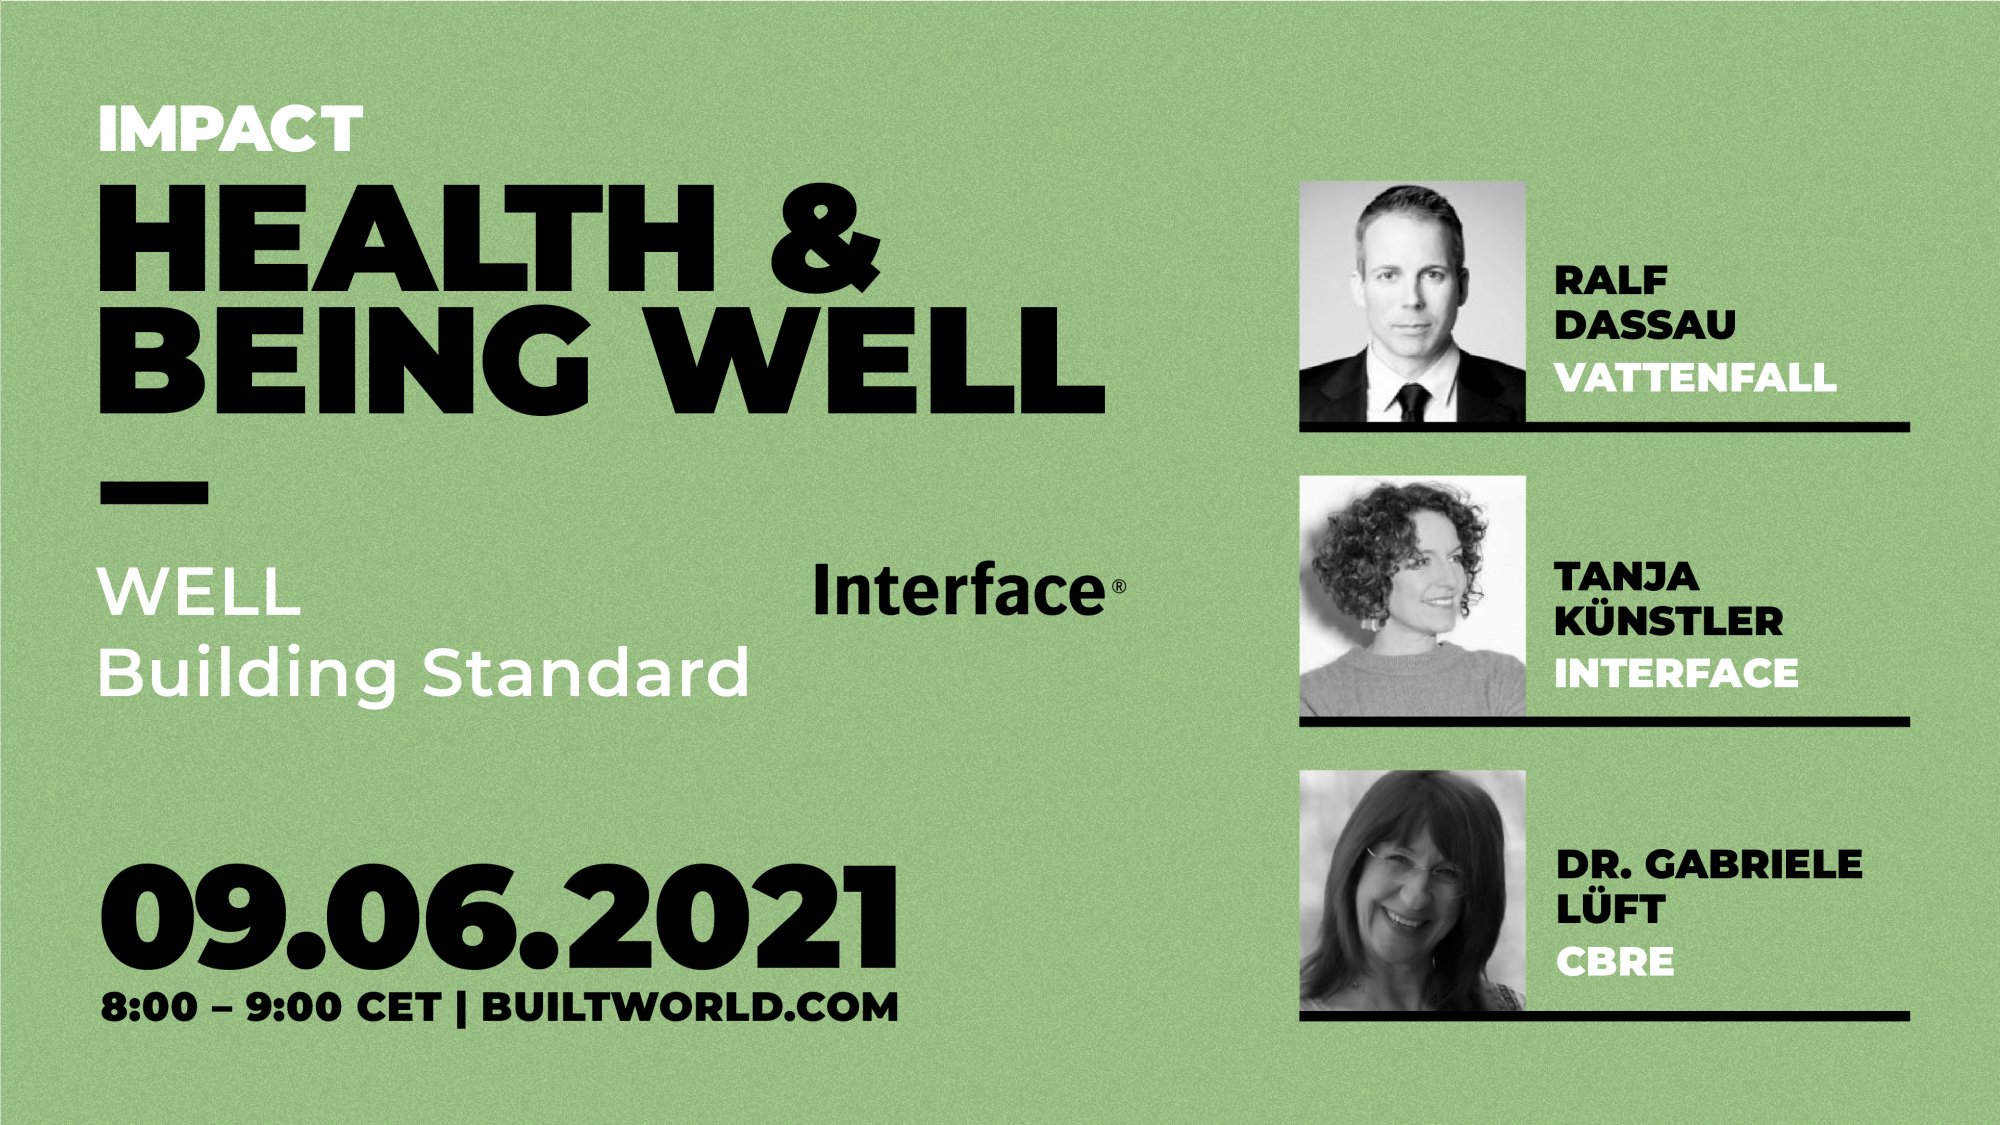 health-being-well-well-building-standard